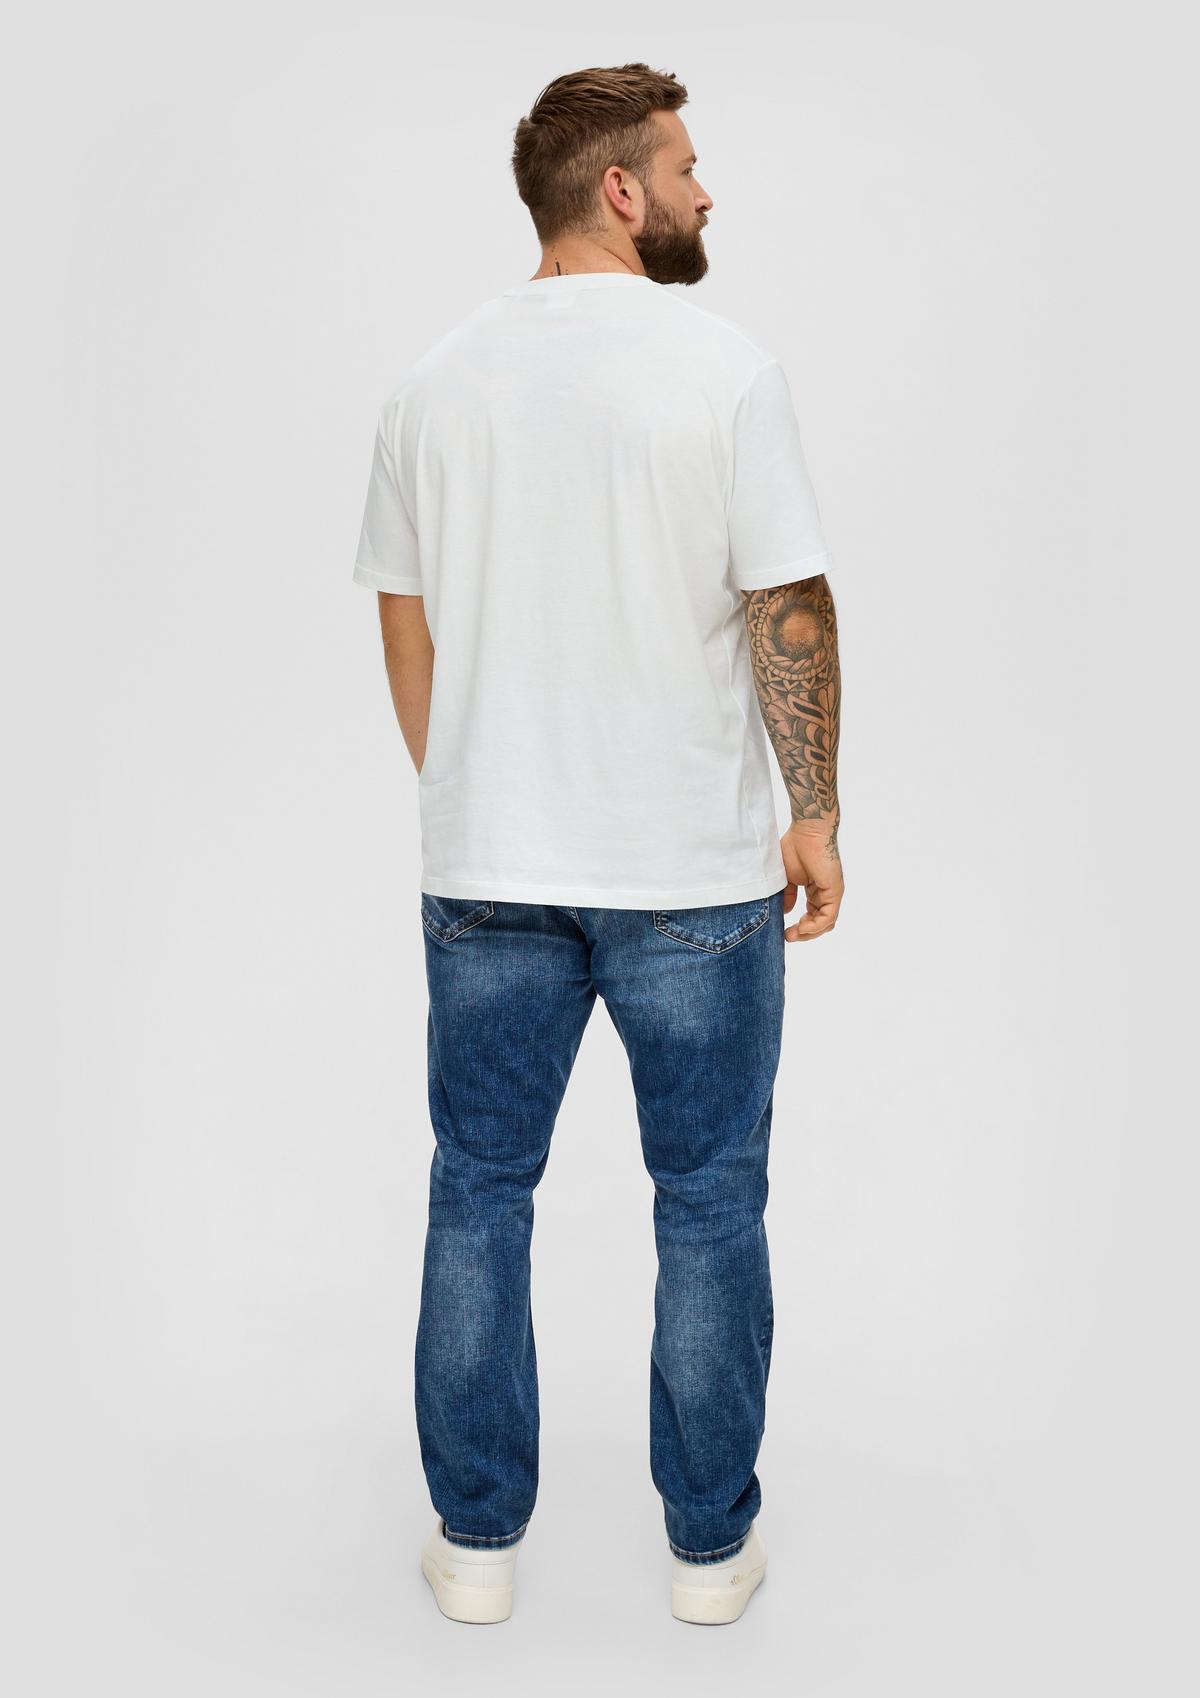 white T-shirt front with - a print